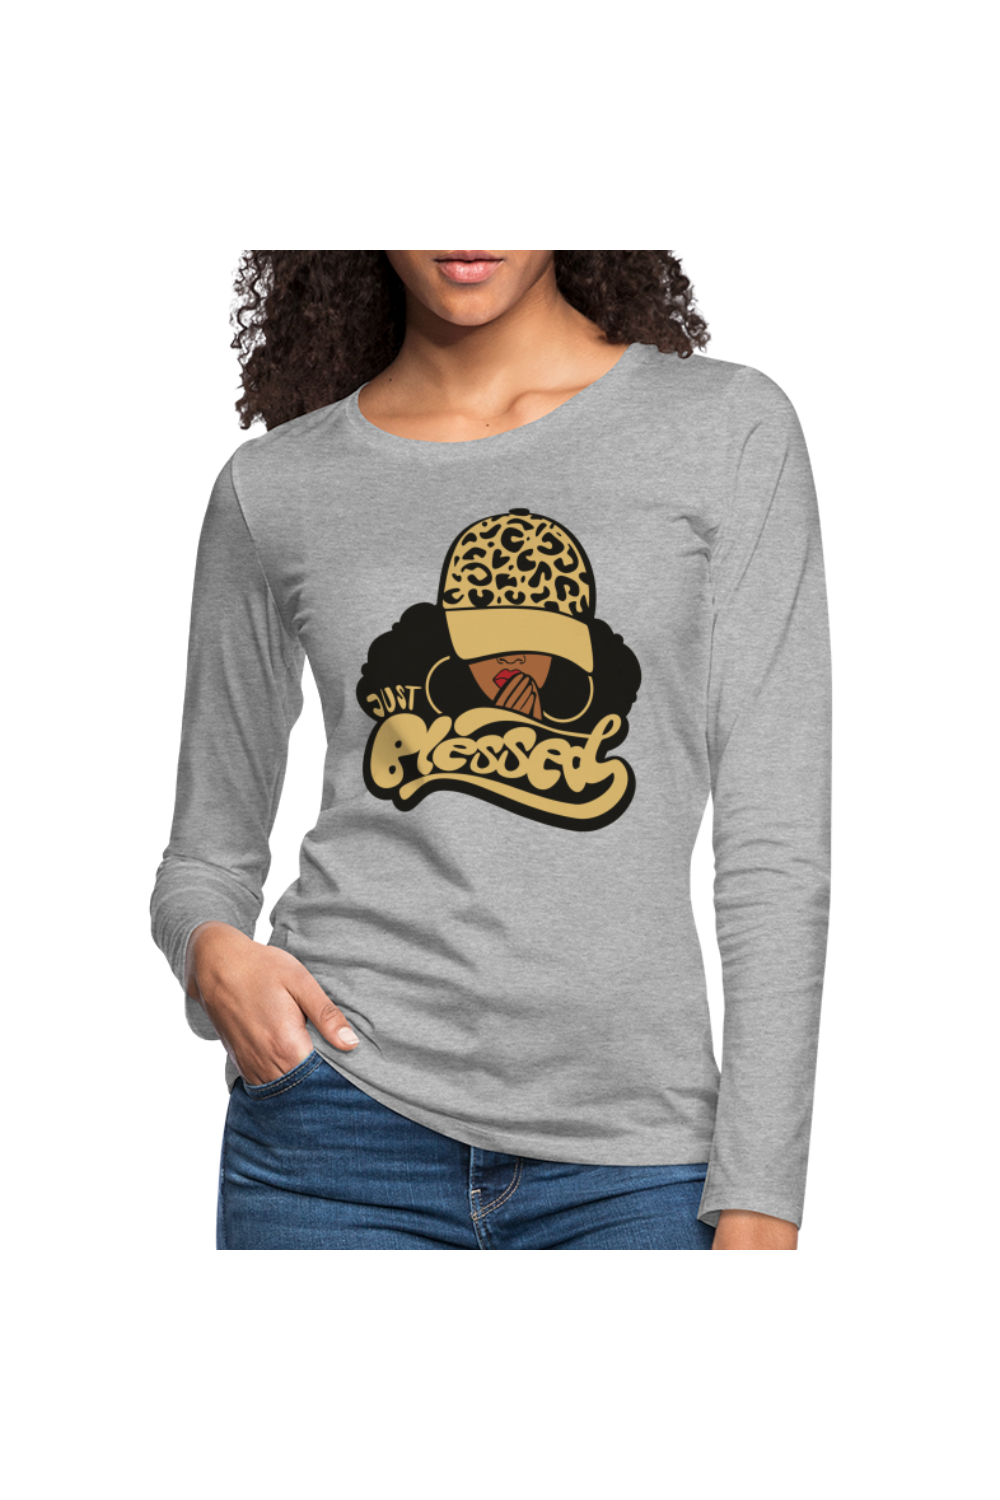 Women's Gold Just Blessed  Long Sleeve T-Shirt - heather gray